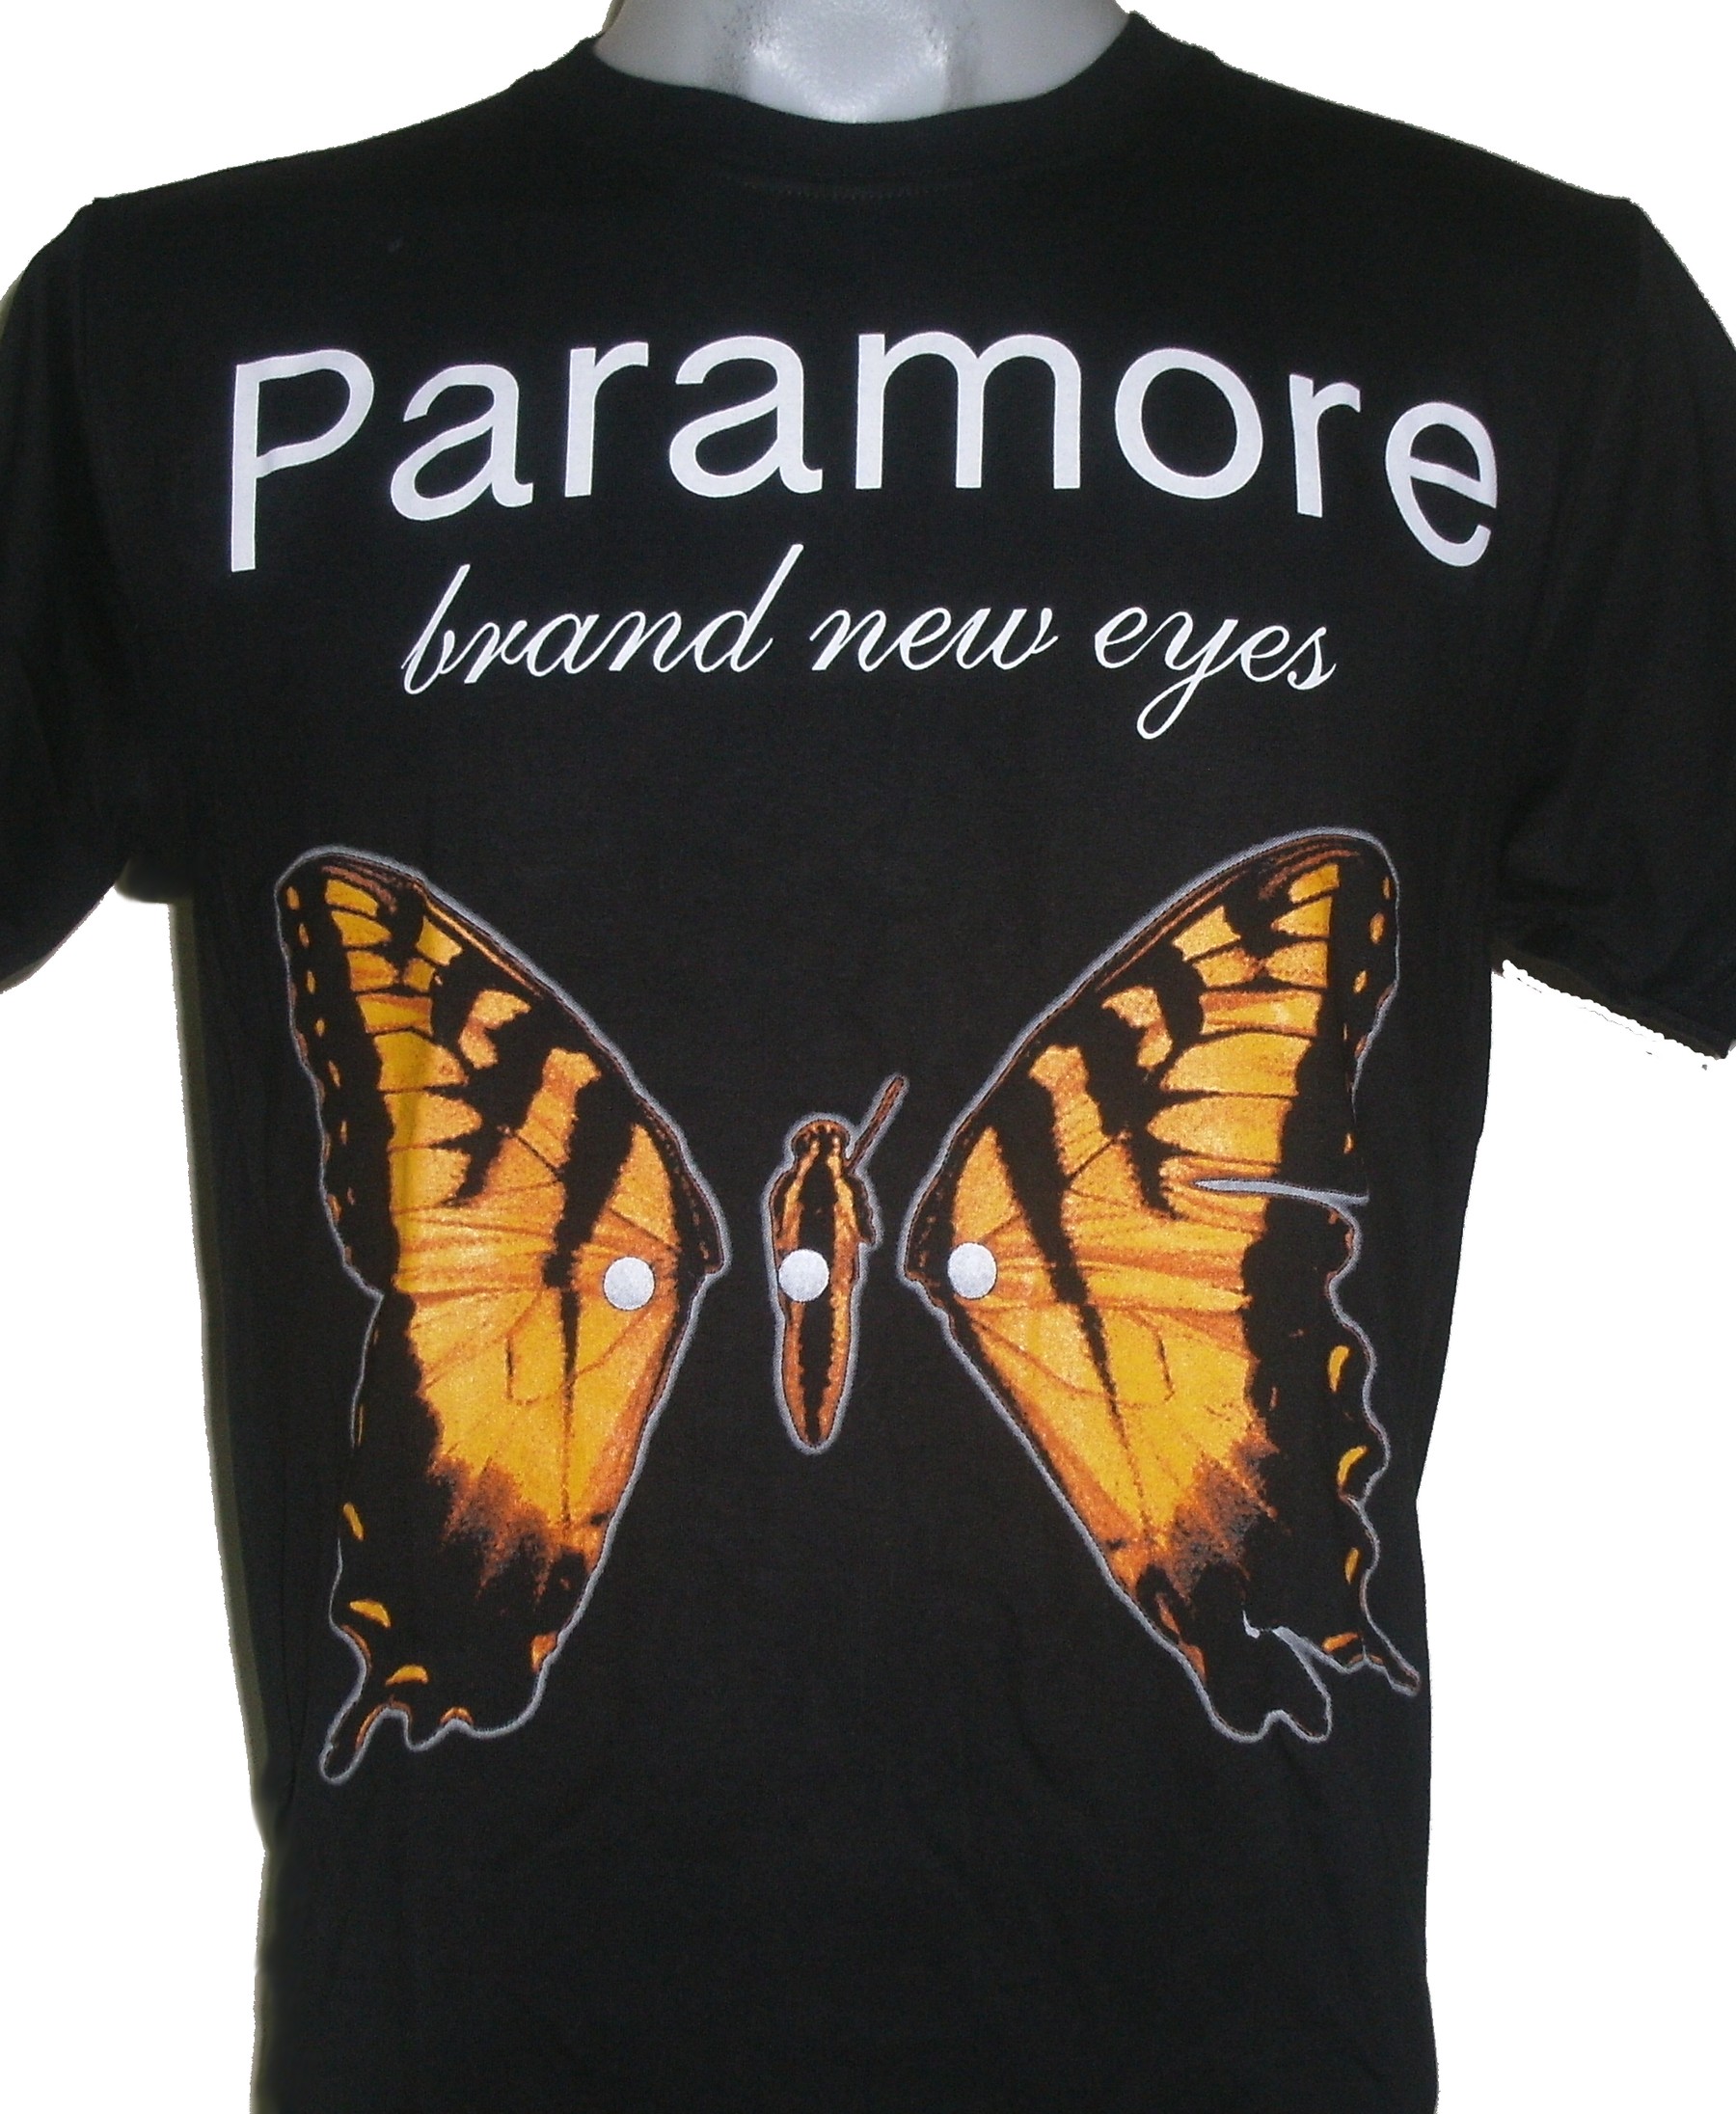 Paramore t-shirt Brand New Eyes size S